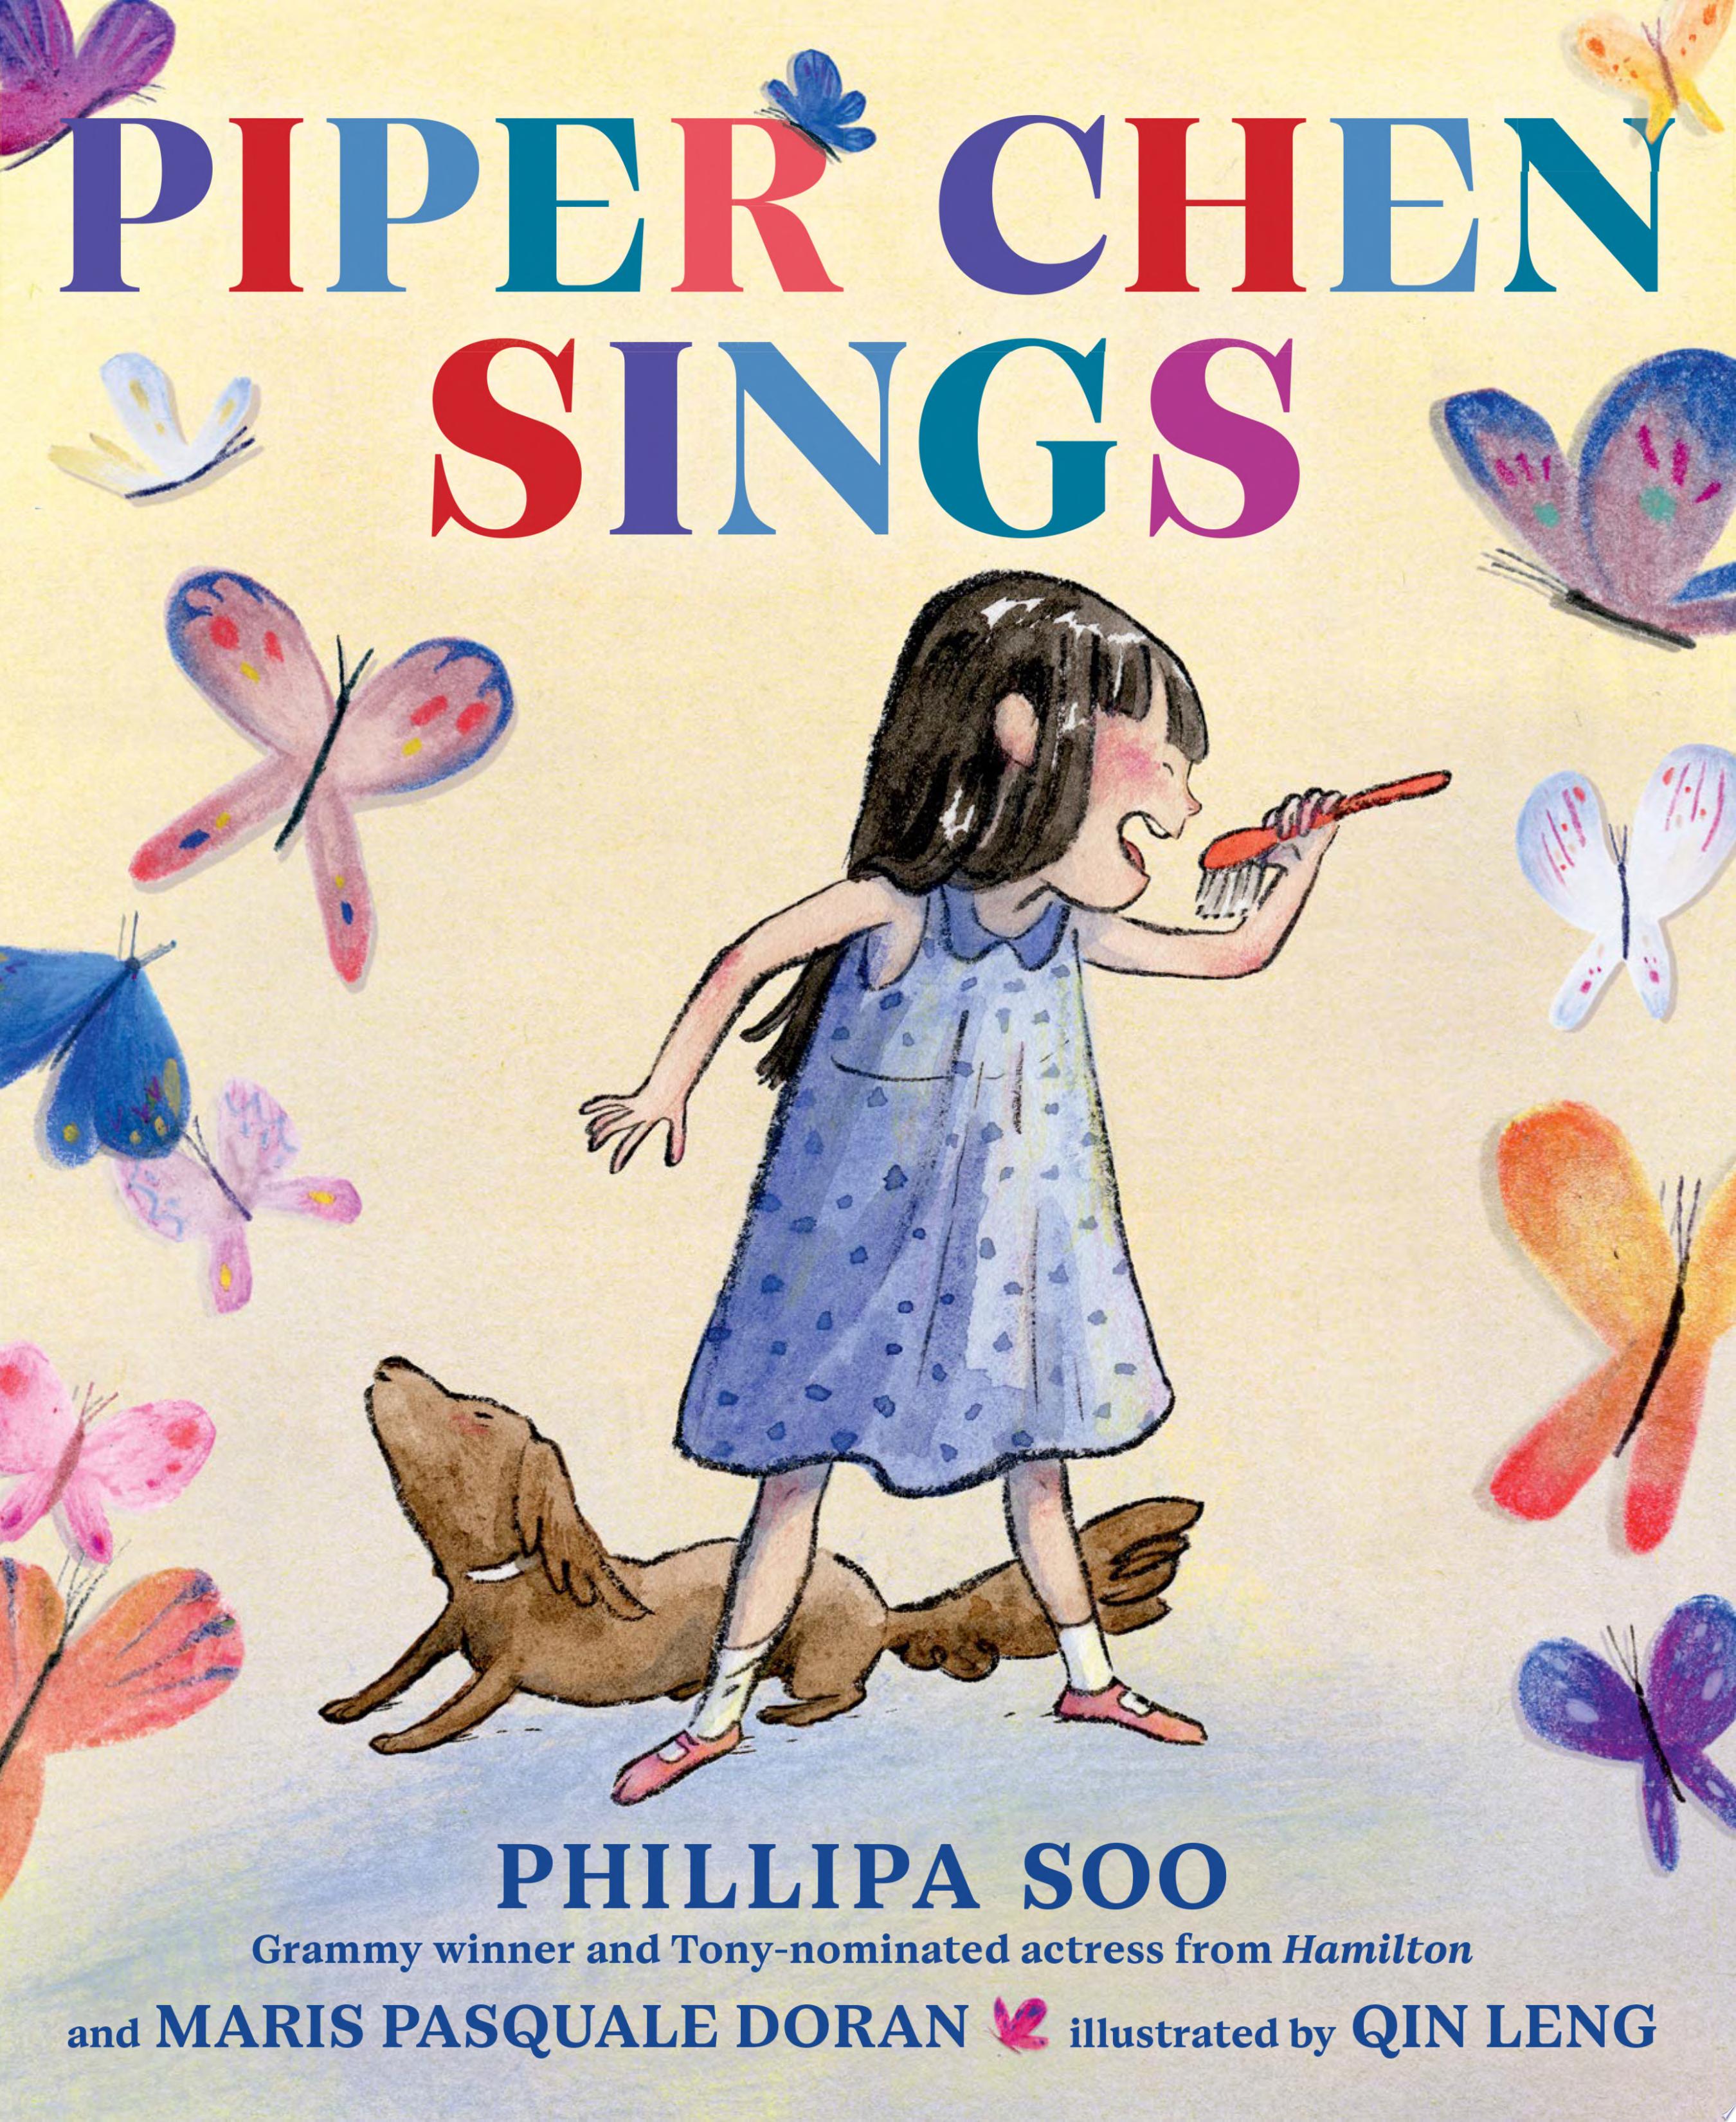 Image for "Piper Chen Sings"